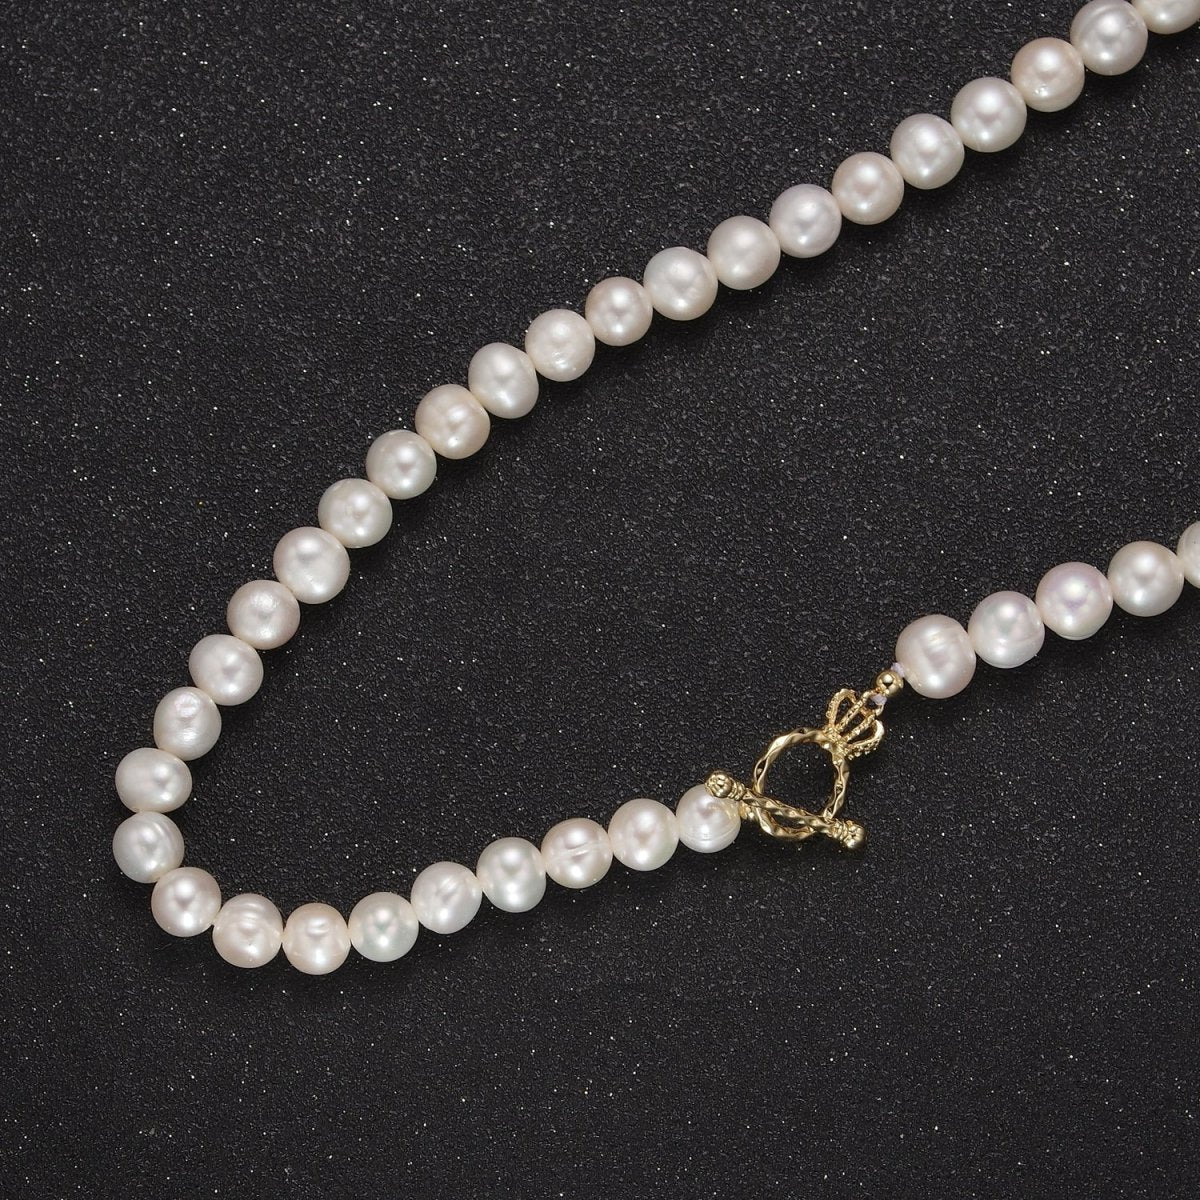 Fresh Water Pearl necklace, T bar necklace, toggle bar necklace, dainty gold necklace, layering necklace, pearl jewelry | WA-869 WA-1161 Clearance Pricing - DLUXCA